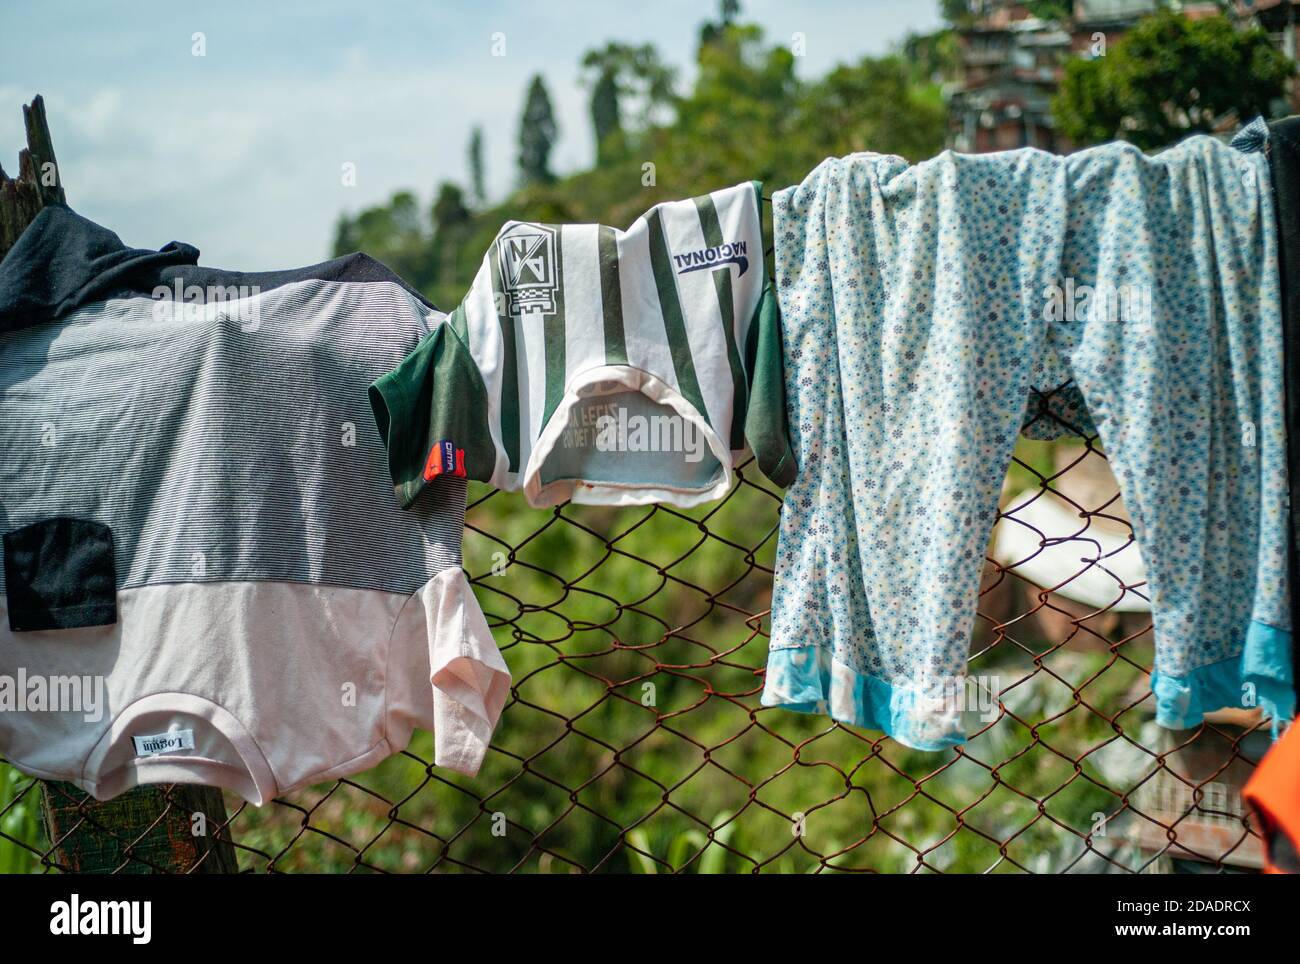 ITAGUI, COLOMBIA - Mar 16, 2019: Itagui, Antioquia / Colombia - March 15 2019: Children's Clothes Hanging and Drying of the Sun over in a Fence Stock Photo